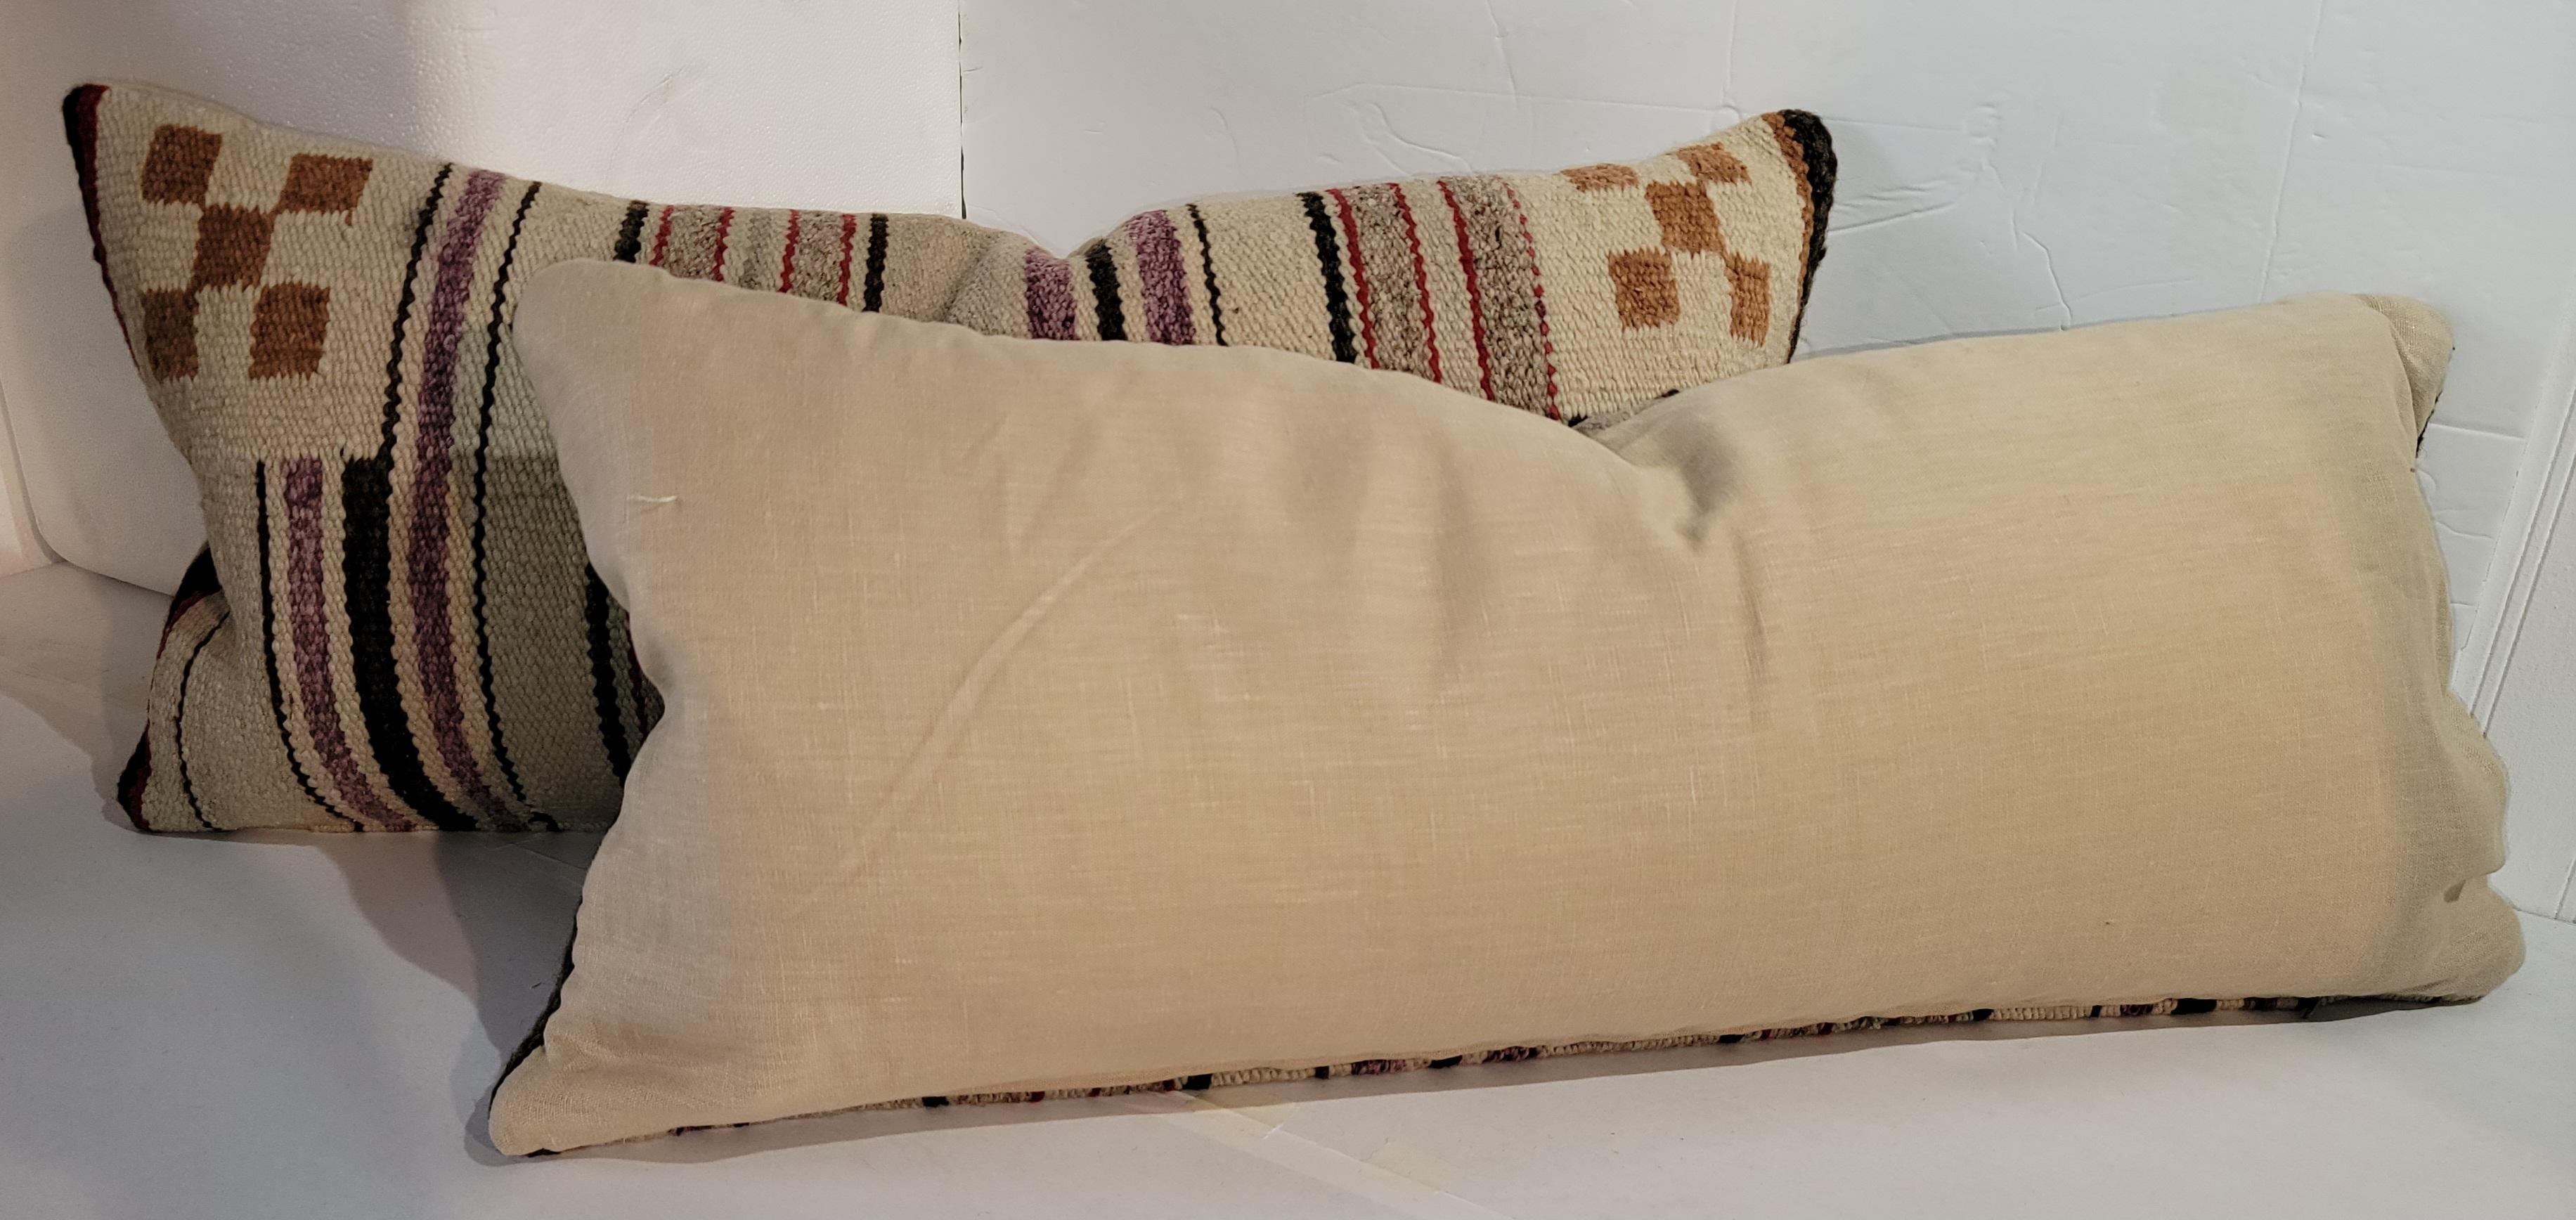 Early Navajo Weaving Saddle Blanket Pillows In Good Condition For Sale In Los Angeles, CA